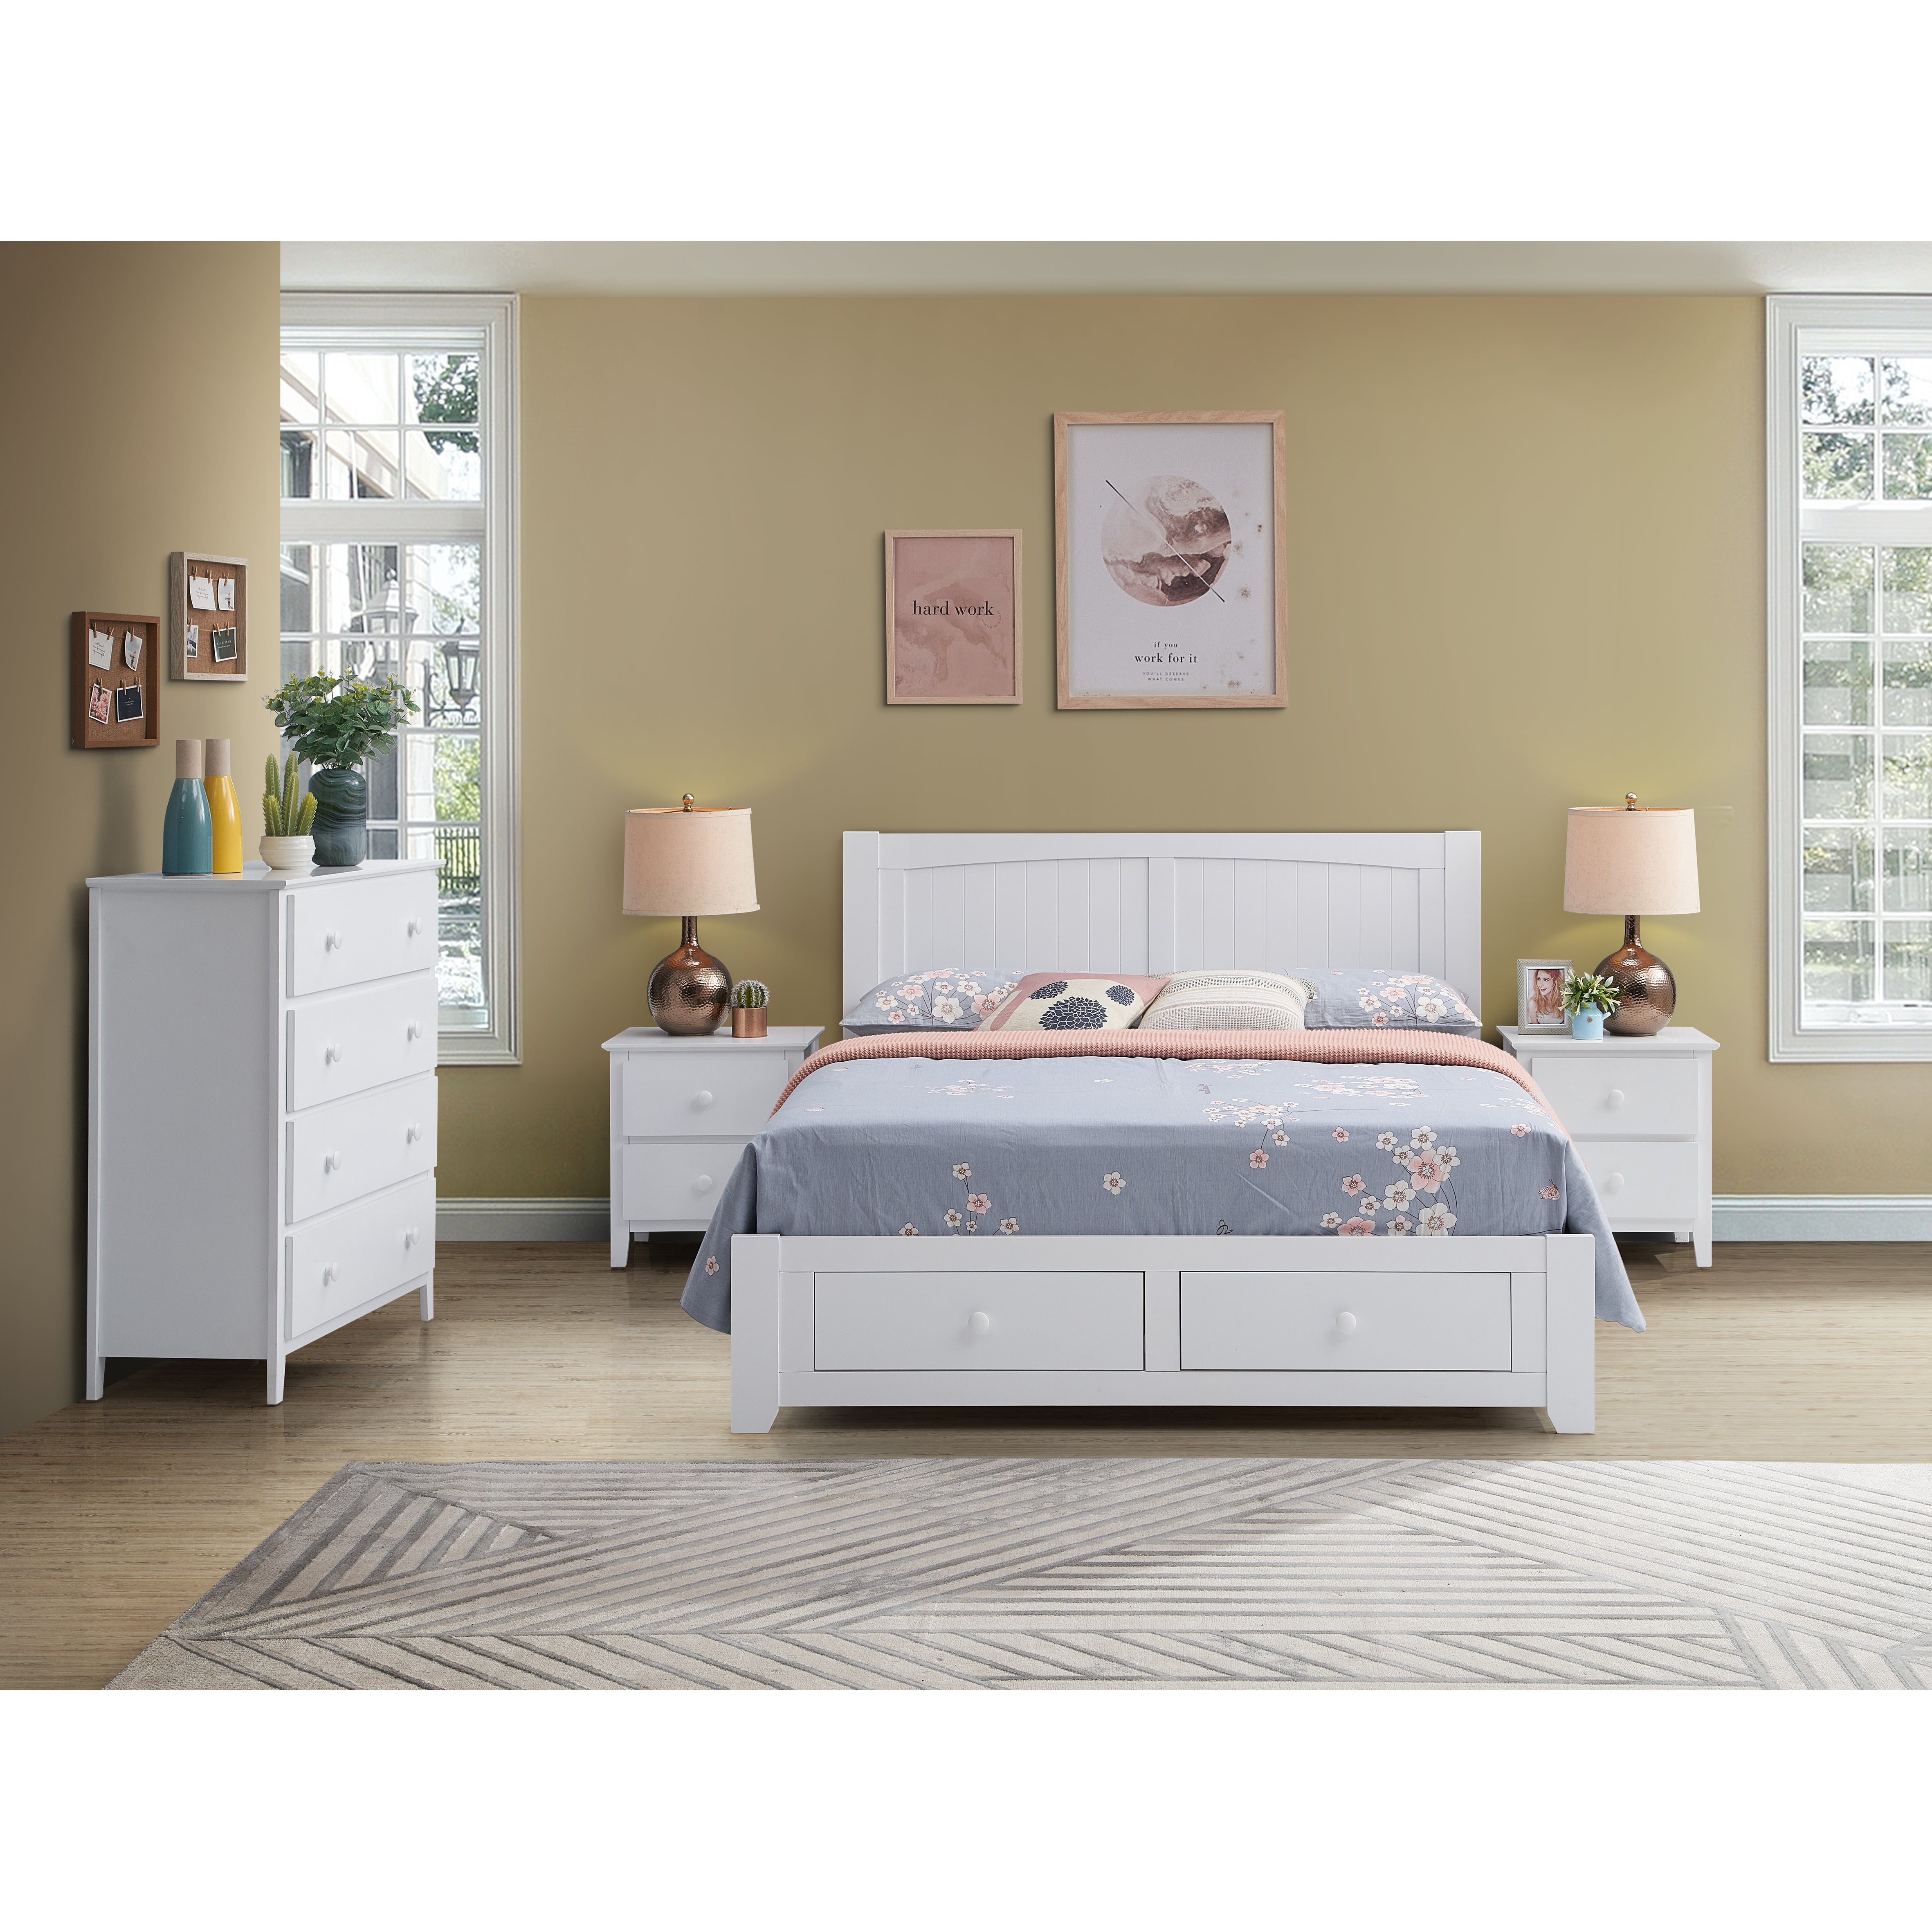 Premium Wood King Single Bed Frame with Built-in Storage Drawer - White